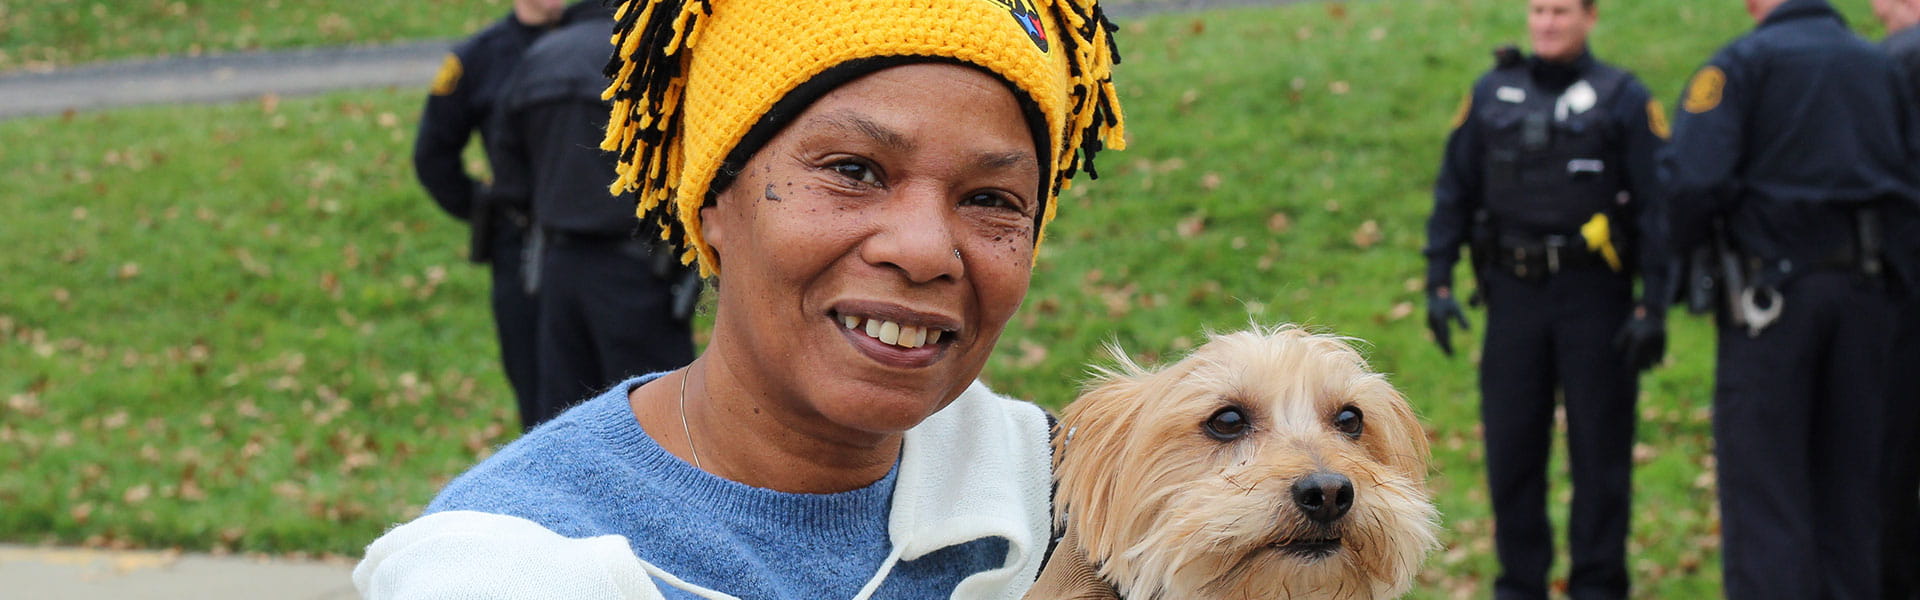 A woman smiling with a dog